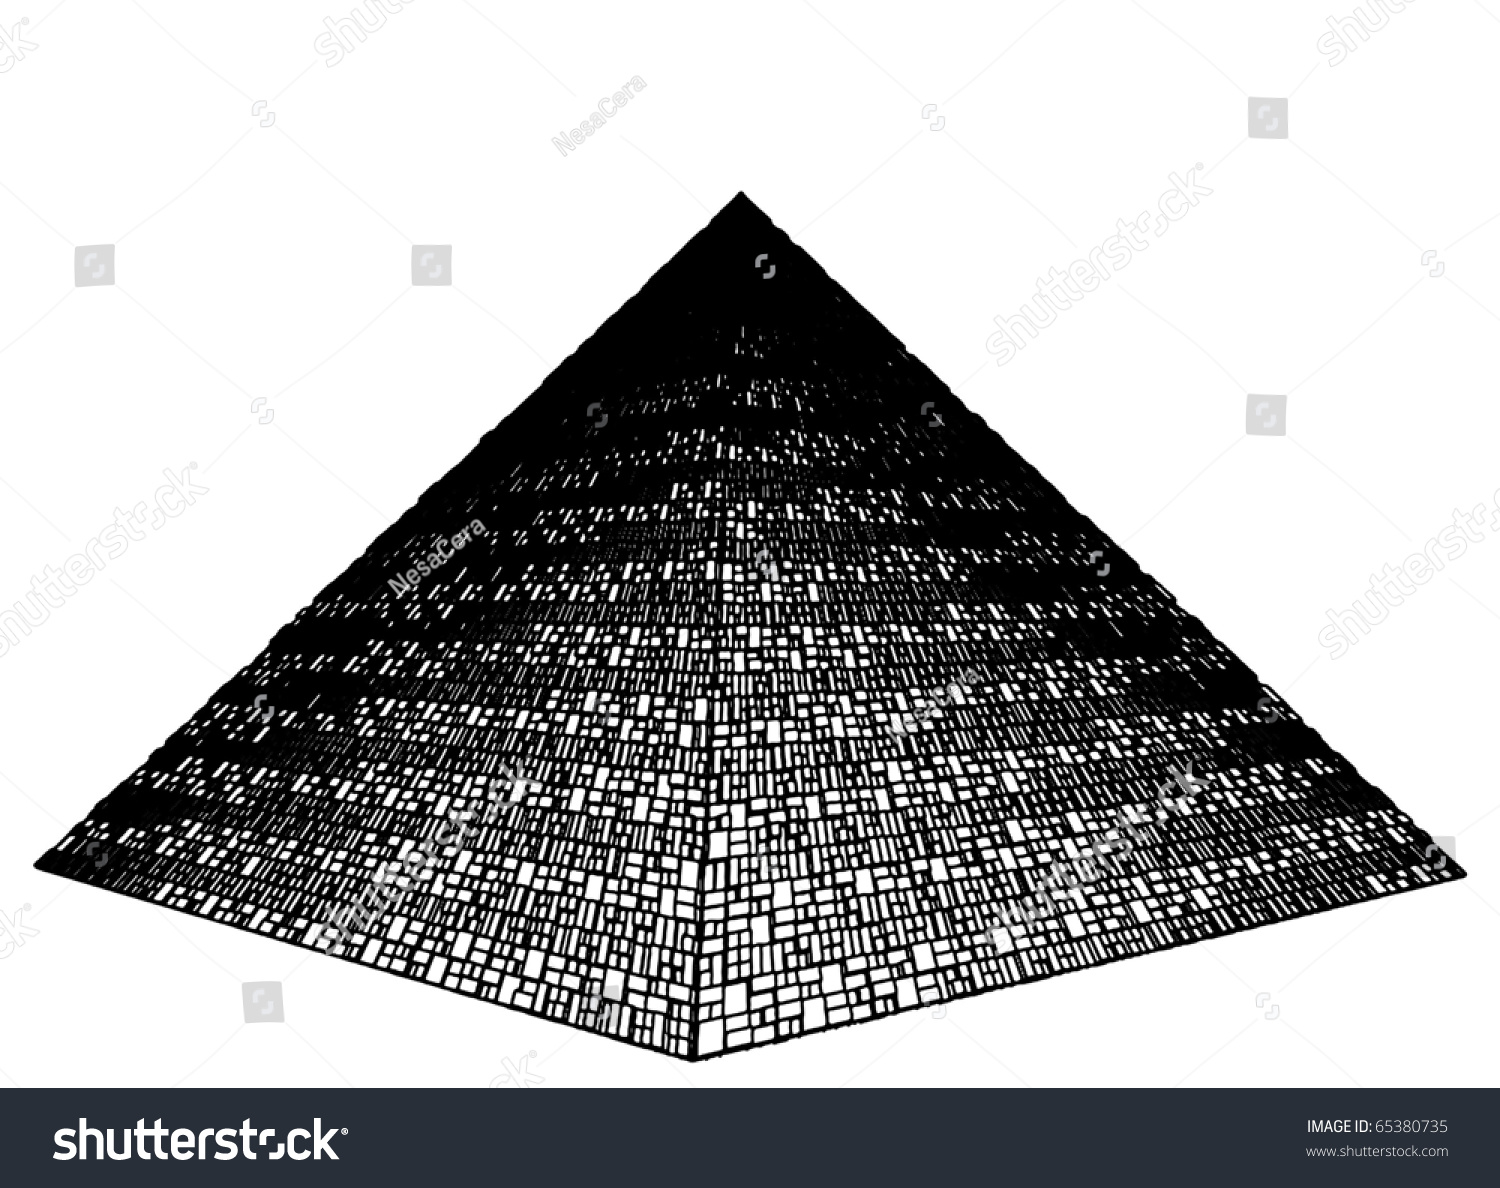 Abstract Construction Of The Pyramid Vector 213 - 65380735 : Shutterstock